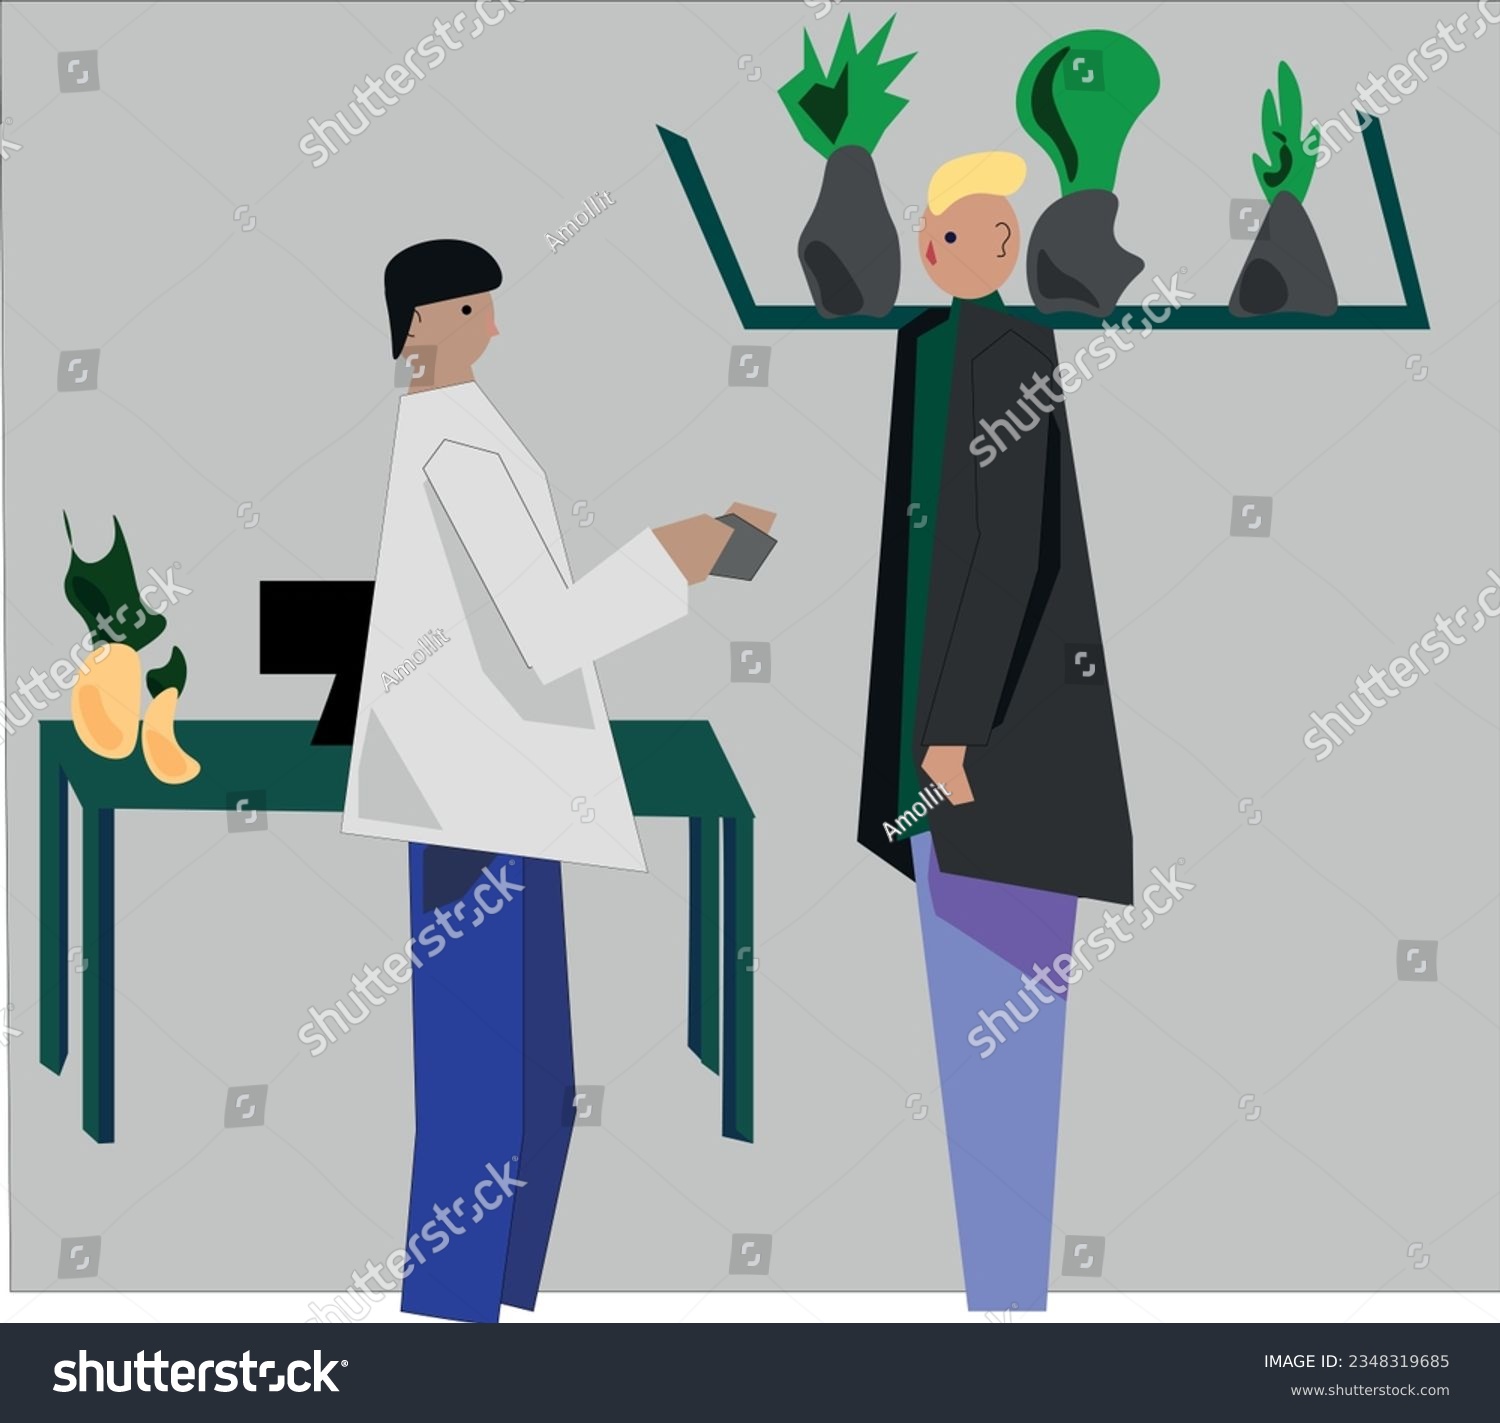 SVG of strange people illustration. a man at a doctor's appointment. treatment in the hospital. two people communicate svg